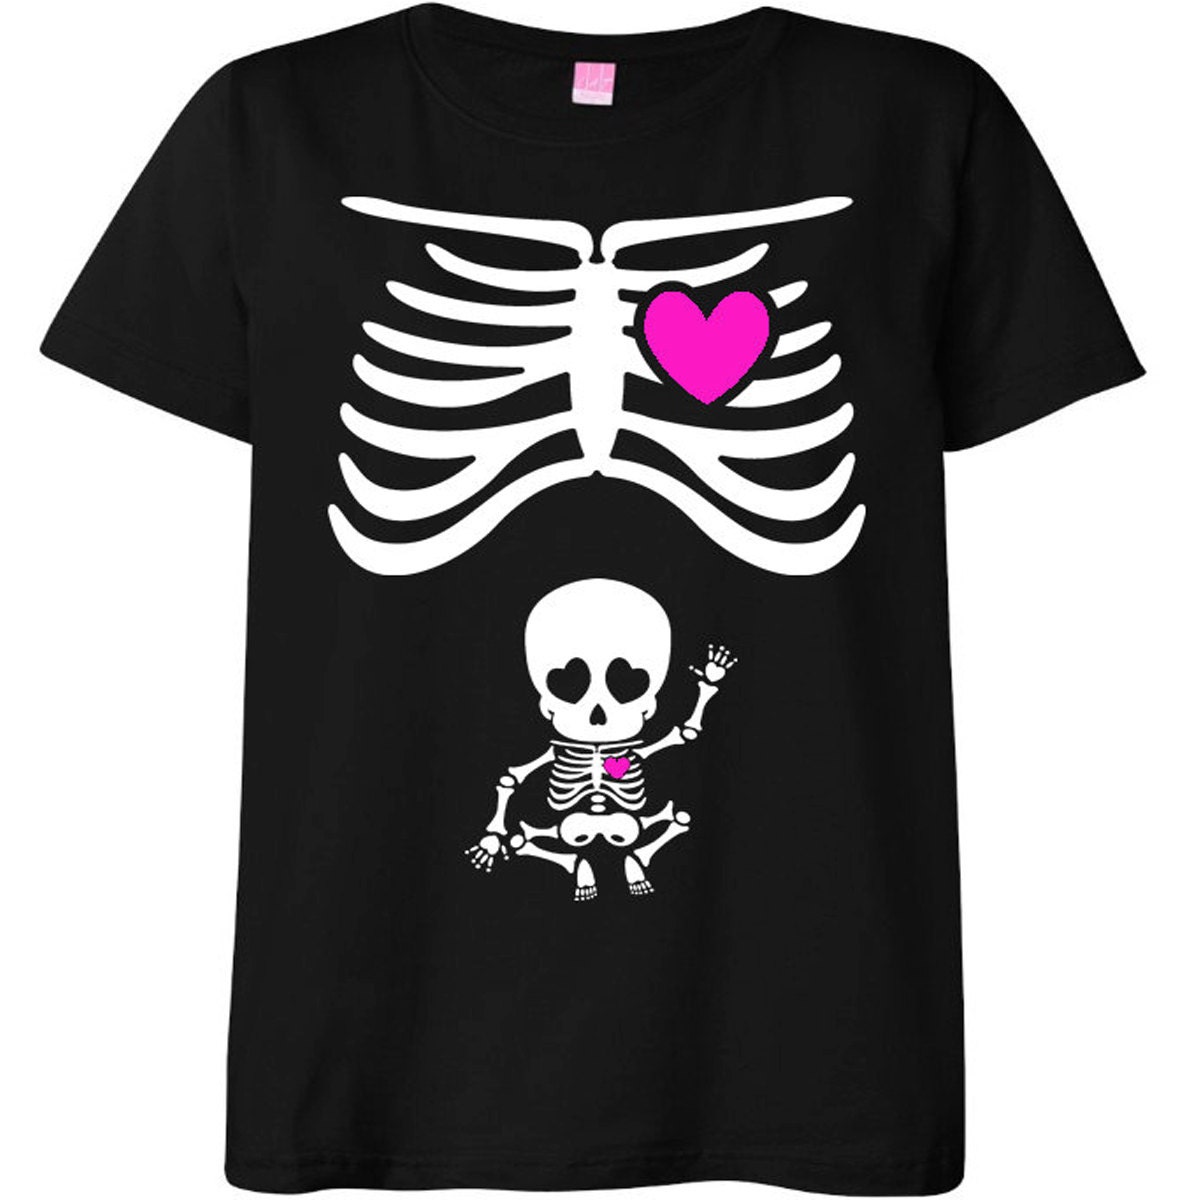 Halloween Maternity T-Shirt Costume Rib Cage and Baby Skeleton